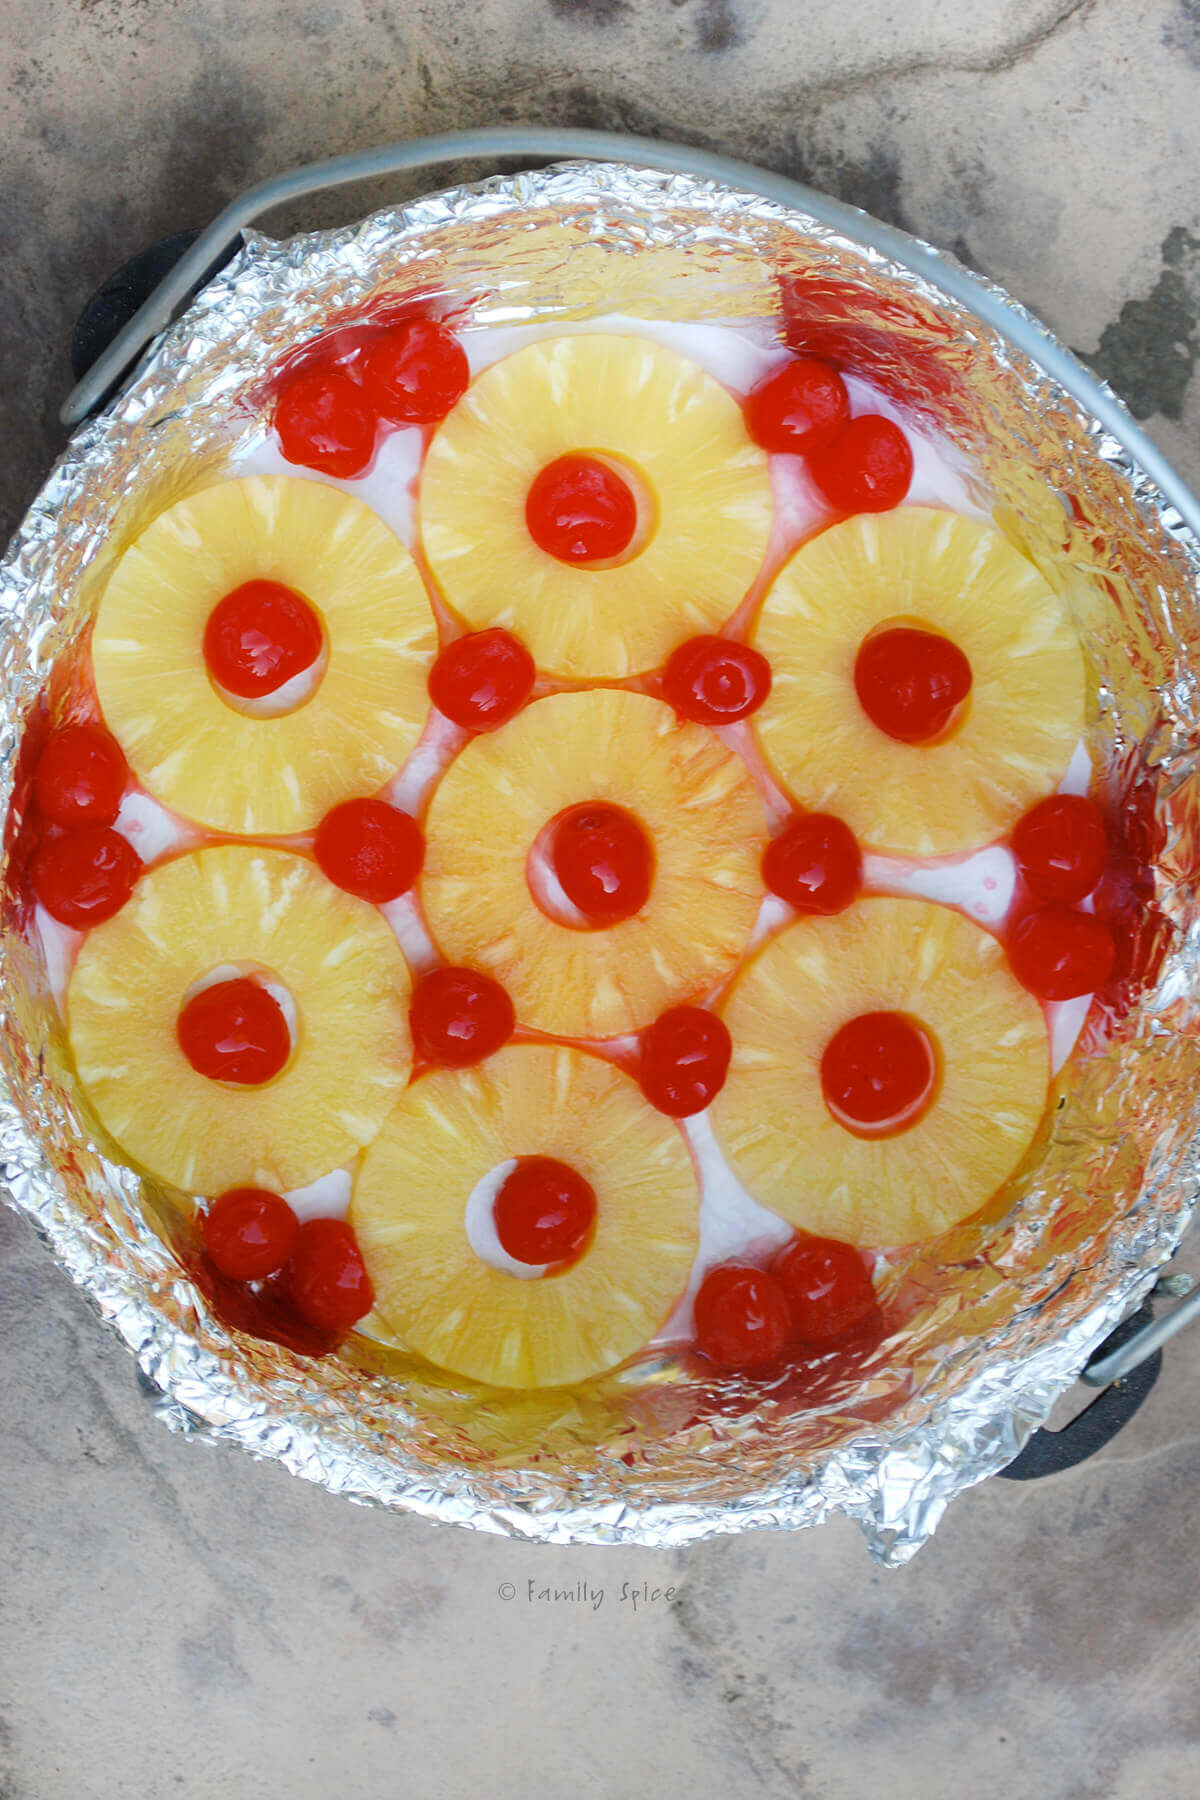 Top view of a Dutch oven lined with foil with pineapple rings and maraschino cherries in it